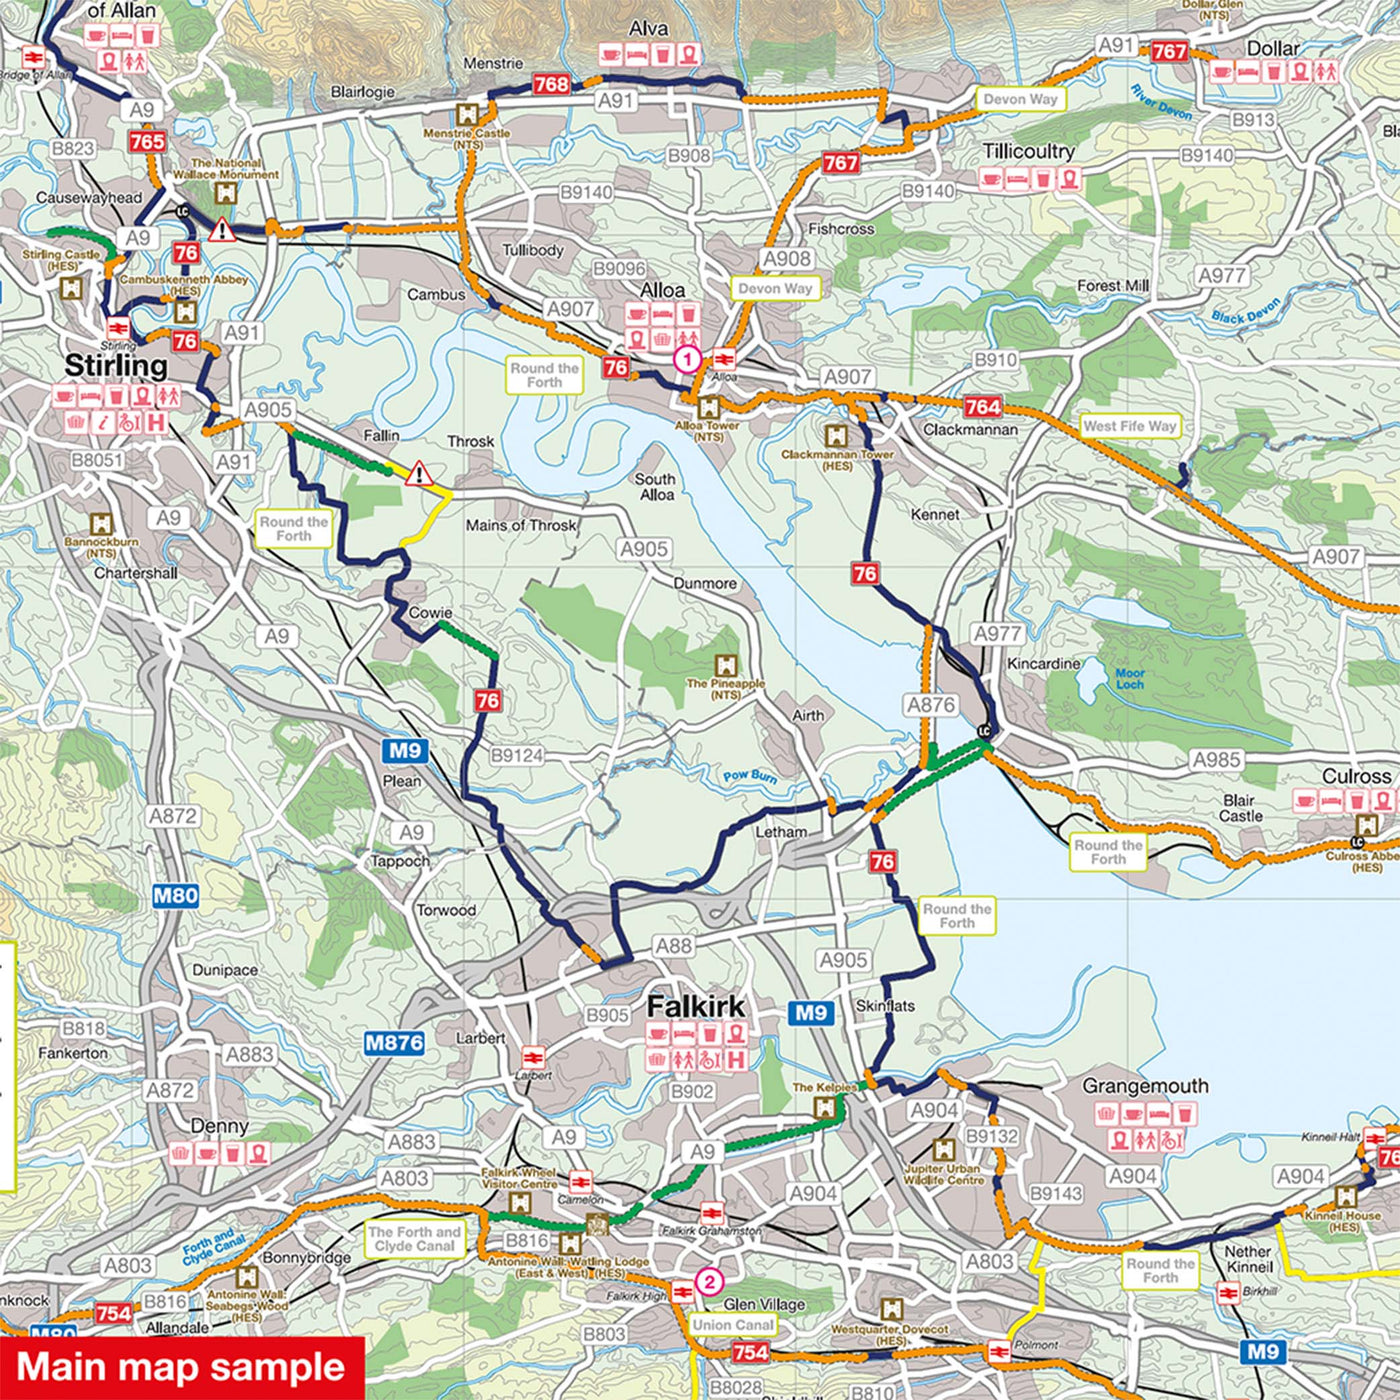 Main map sample of the Edinburgh, Stirling and the Forth cycle map